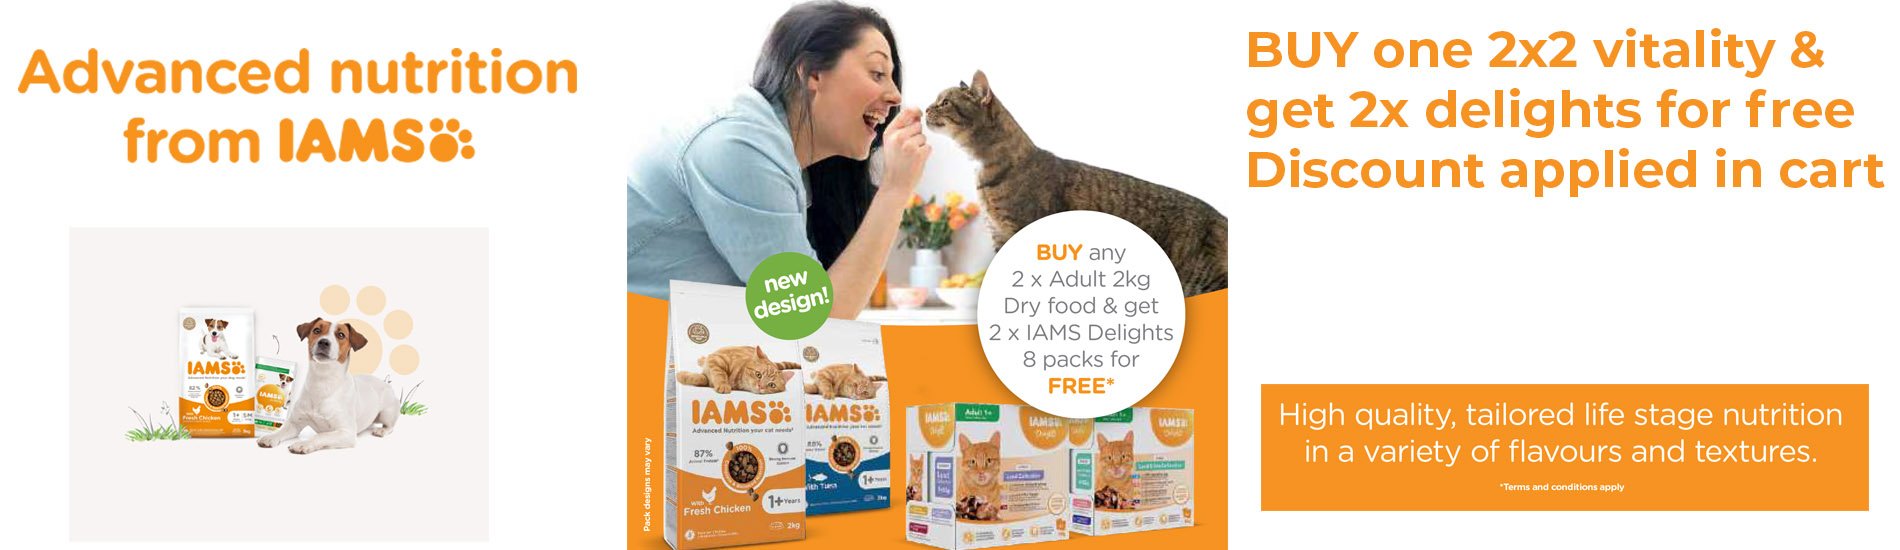 IAMS February Cat food promotion banner buy one 2x2kg vitality, get free 2x iams delights.